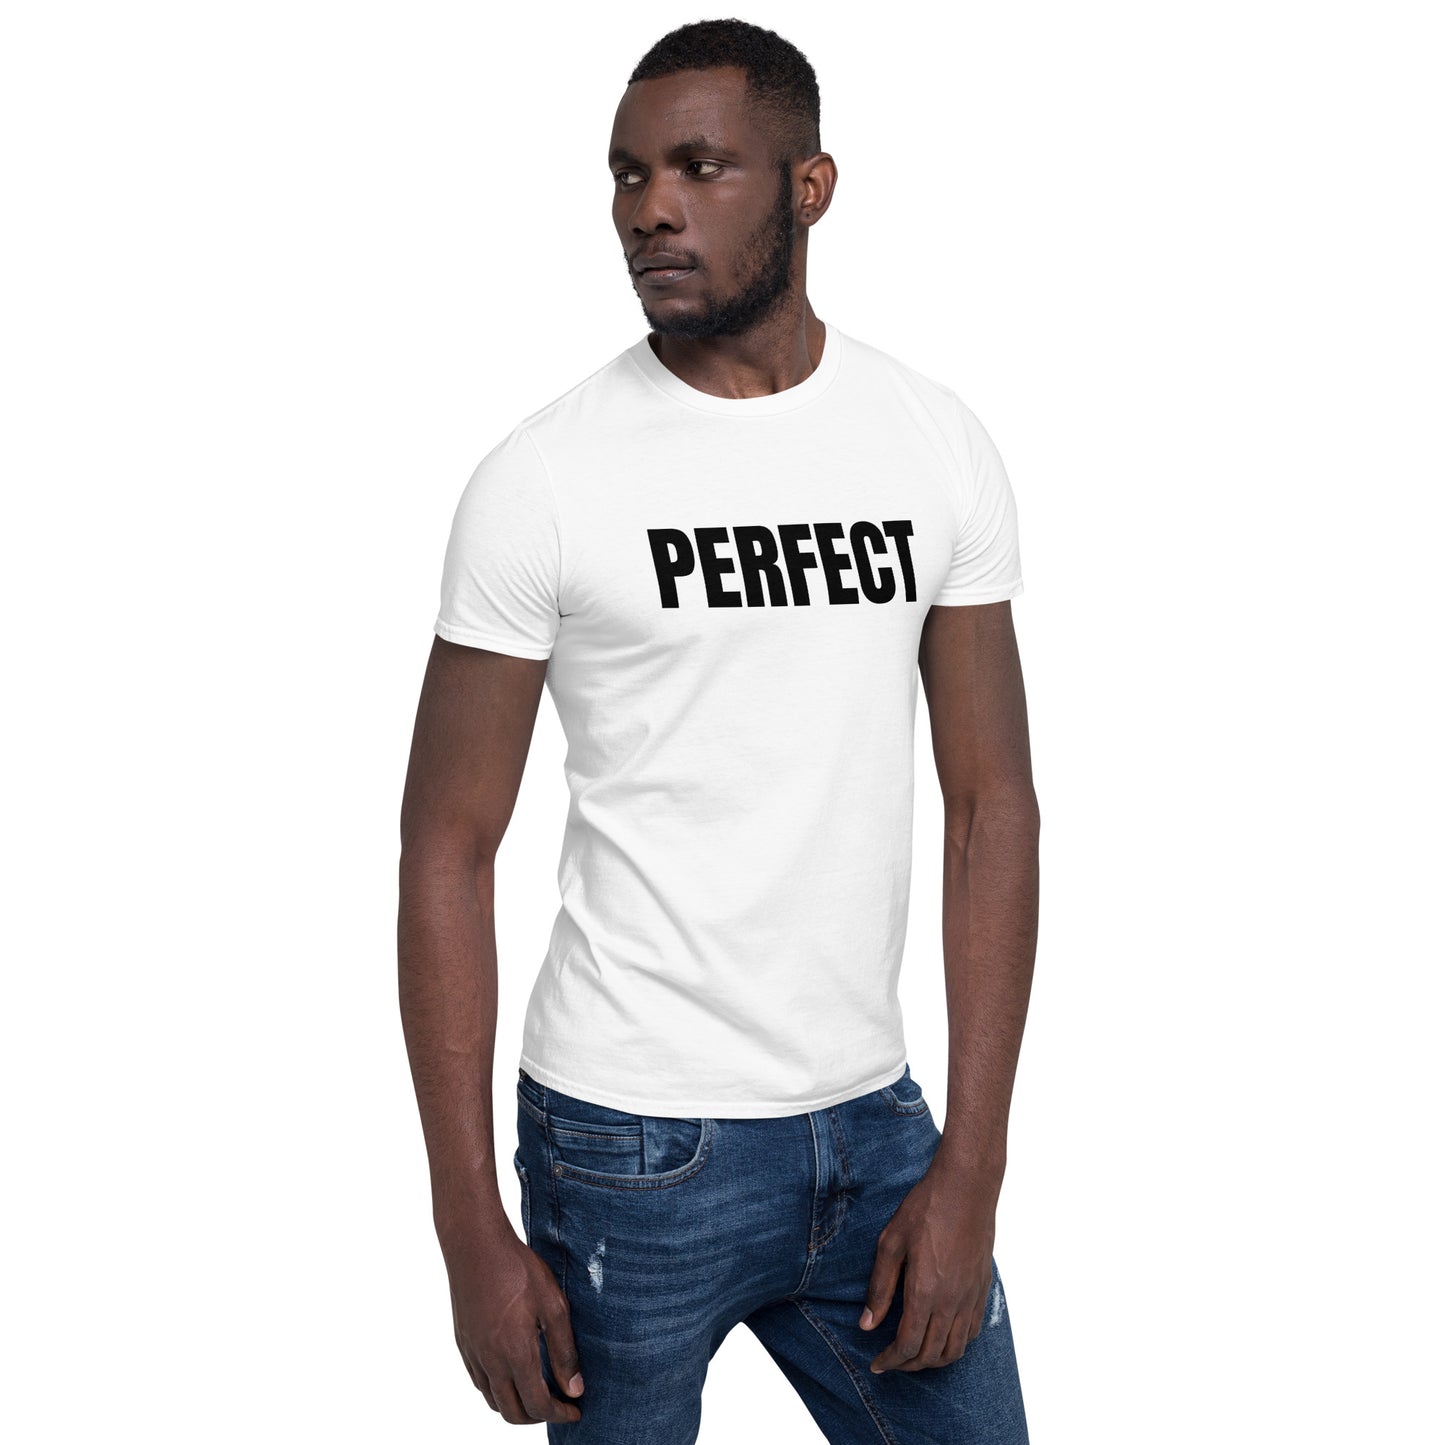 Short-Sleeve Unisex T-Shirt "PERFECT AS YOU ARE" white